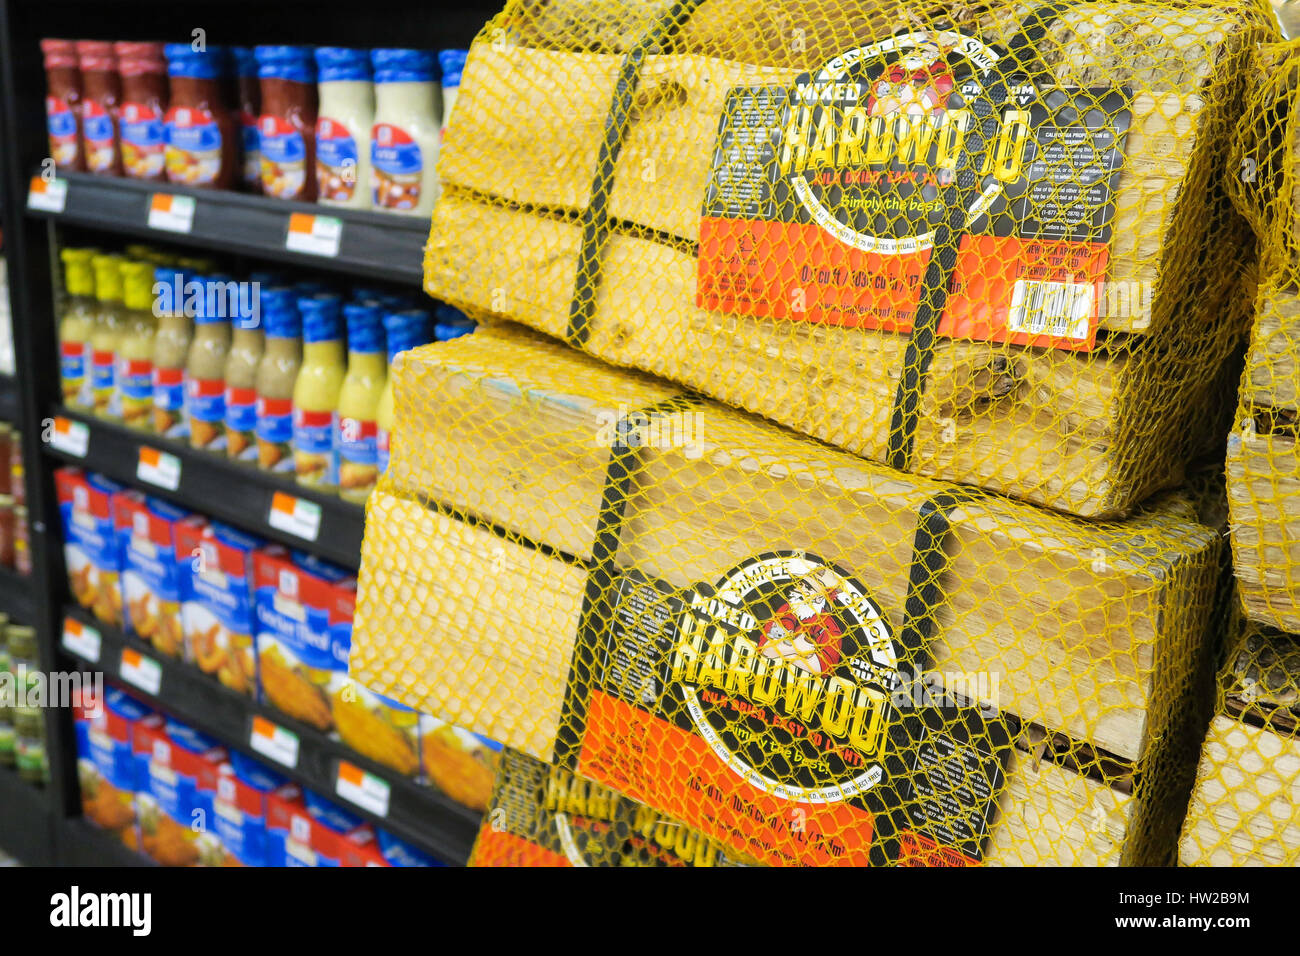 Net Packs of Fireplace /Sized Wood, D'Agostino Grocery Store in New York City, United States Stock Photo